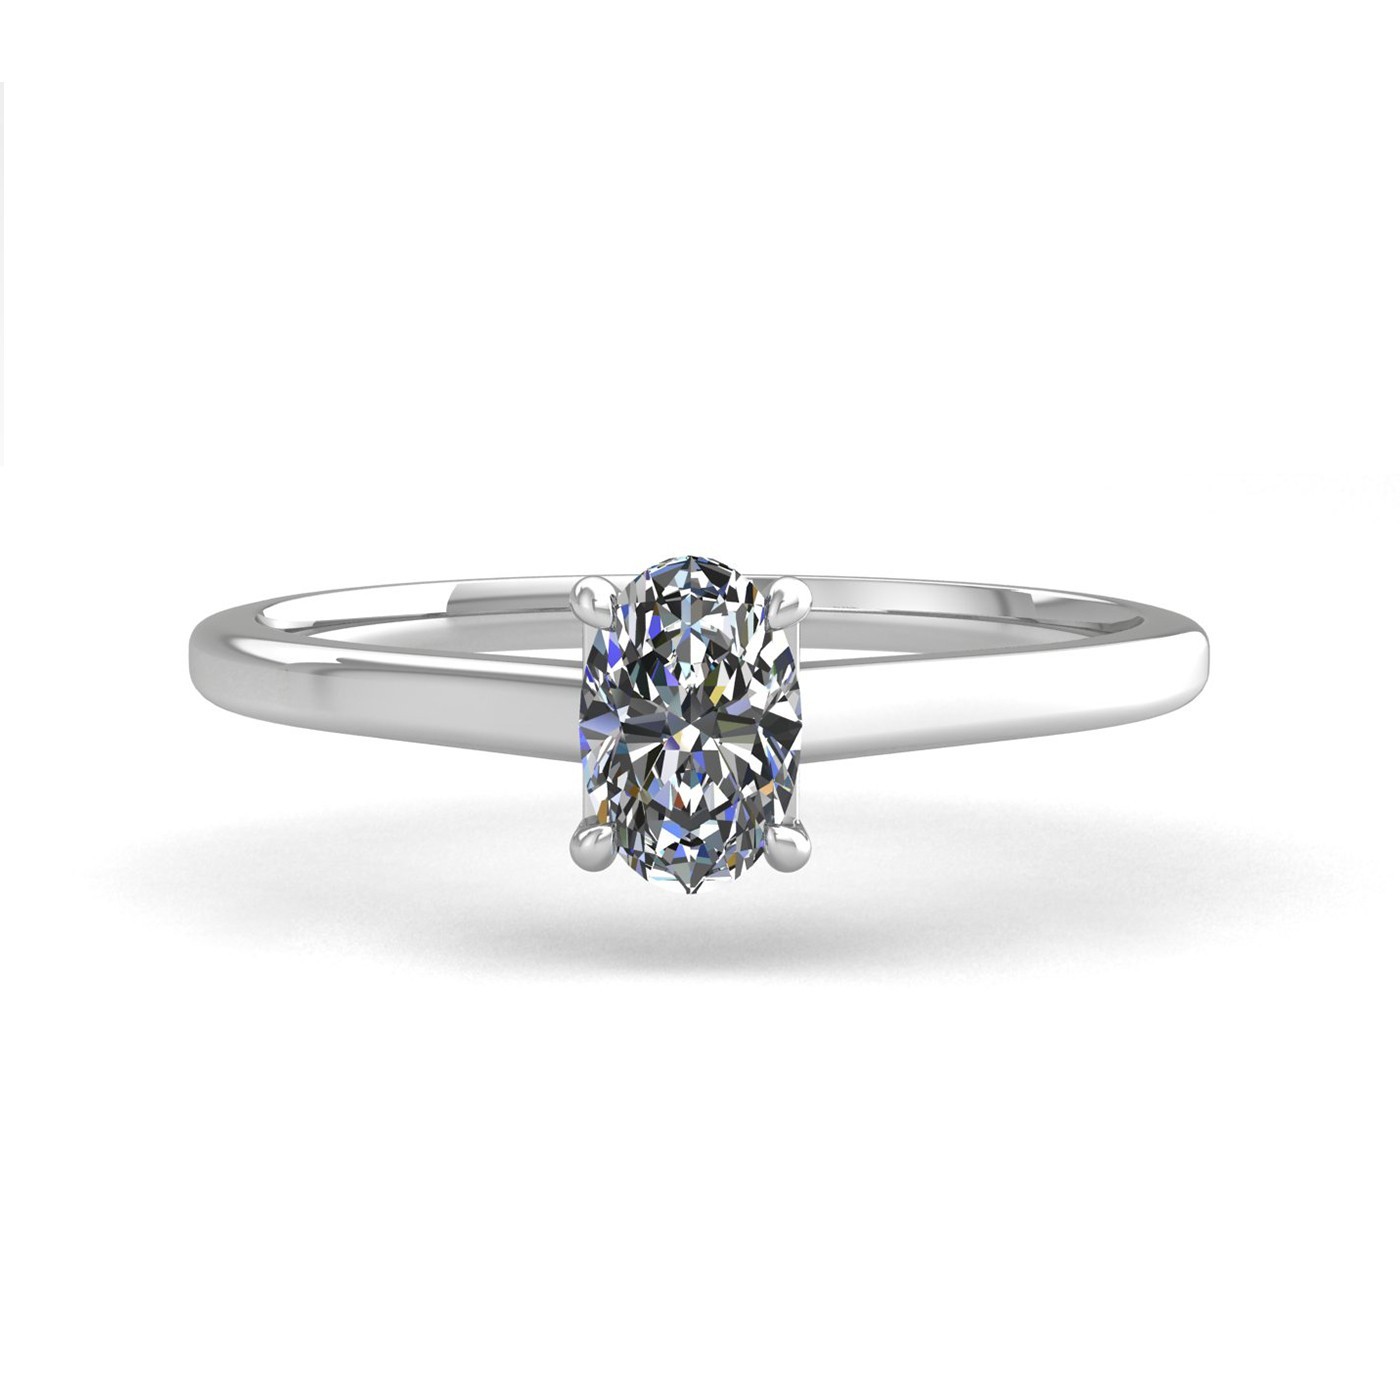 18K WHITE GOLD  0,30 CT 4 PRONGS SOLITAIRE OVAL CUT DIAMOND ENGAGEMENT RING WITH WHISPER THIN BAND